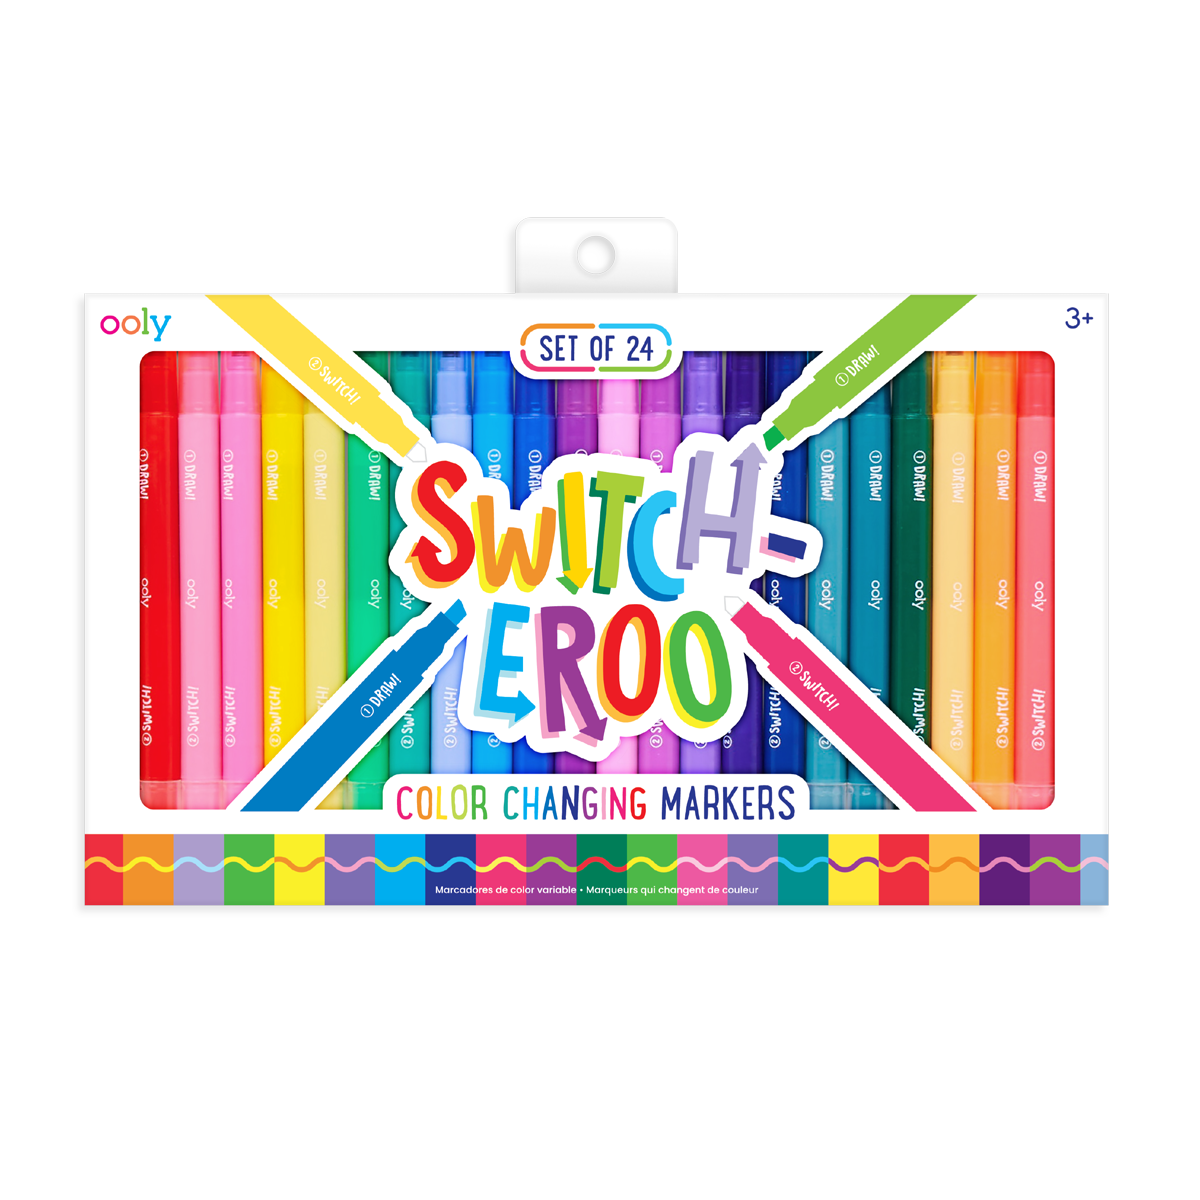 Ooly - Rainbow Sparkle Glitter Markers - Set of 15